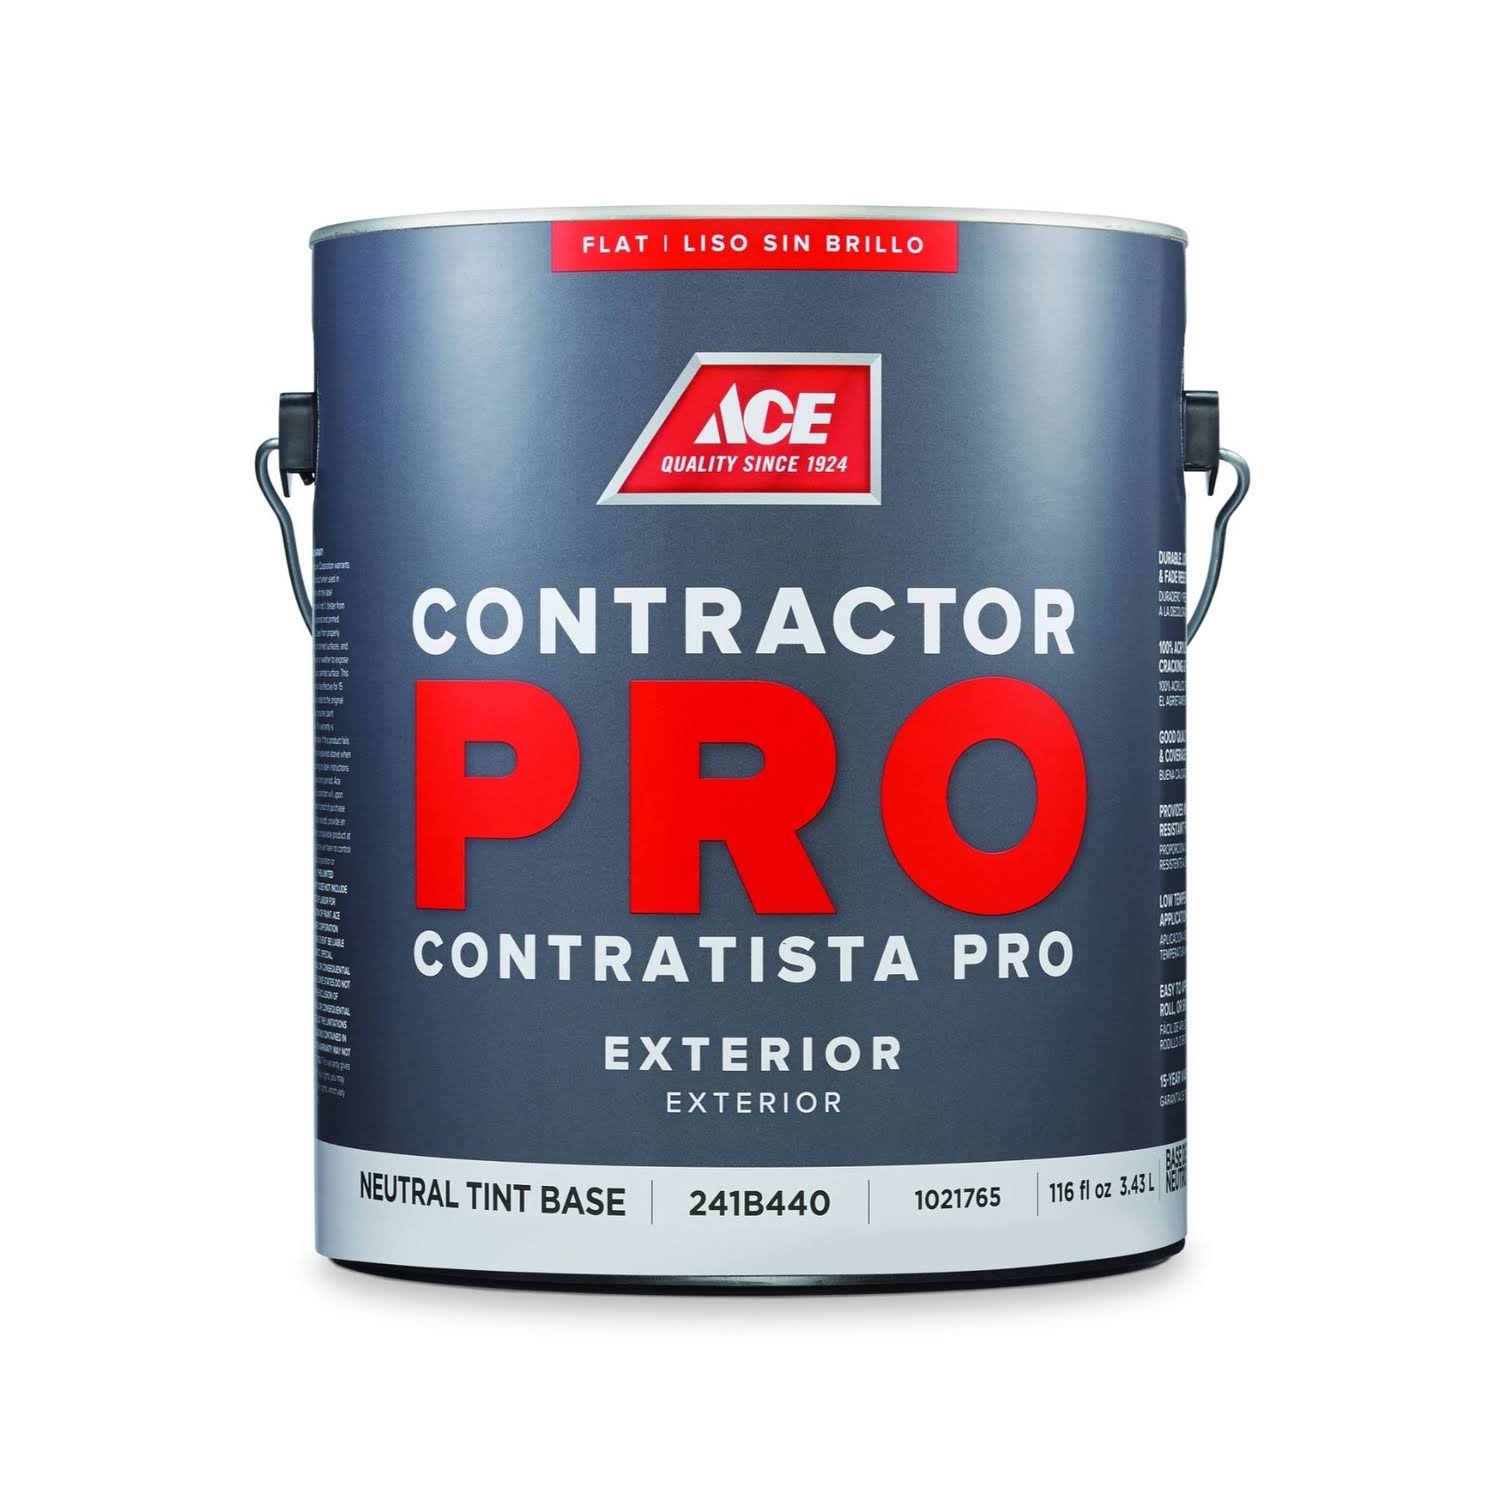 Ace Contractor Pro Flat Tint Base Neutral Base Acrylic Latex Paint Exterior 1 gal.